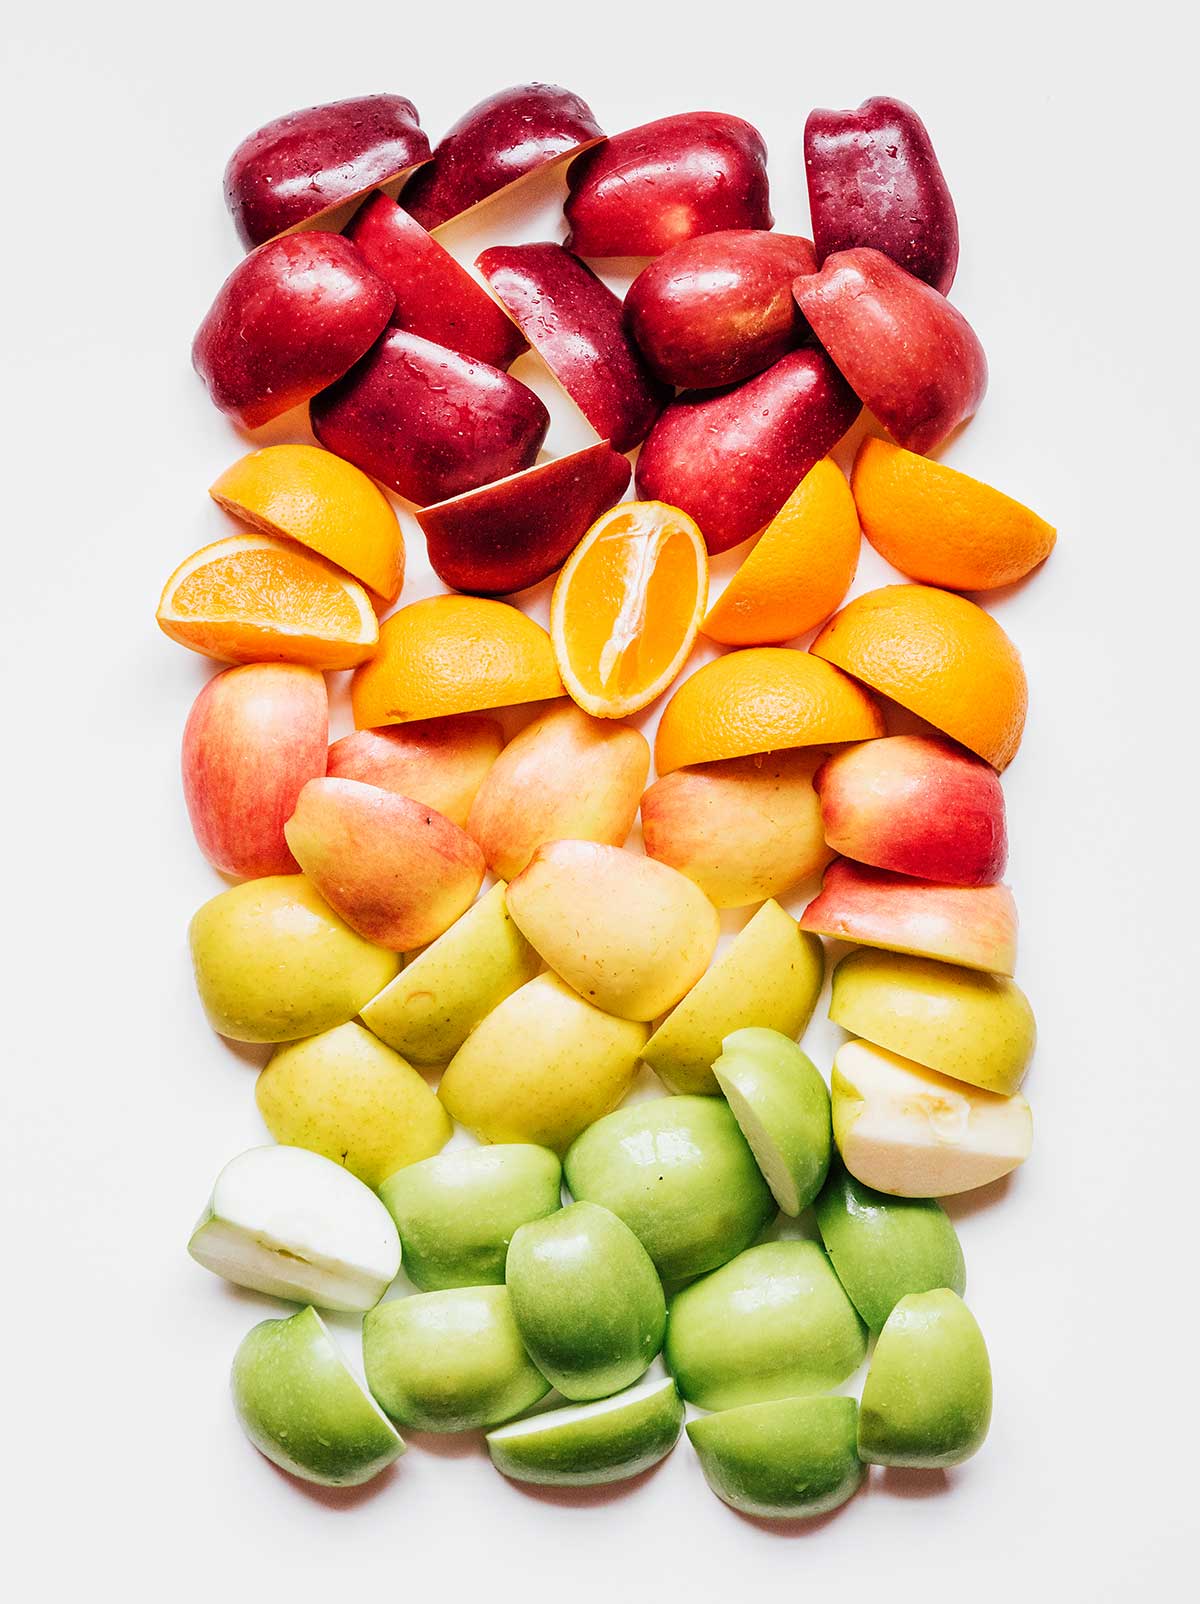 A rainbow of quartered apples and sliced oranges laid out on a white background